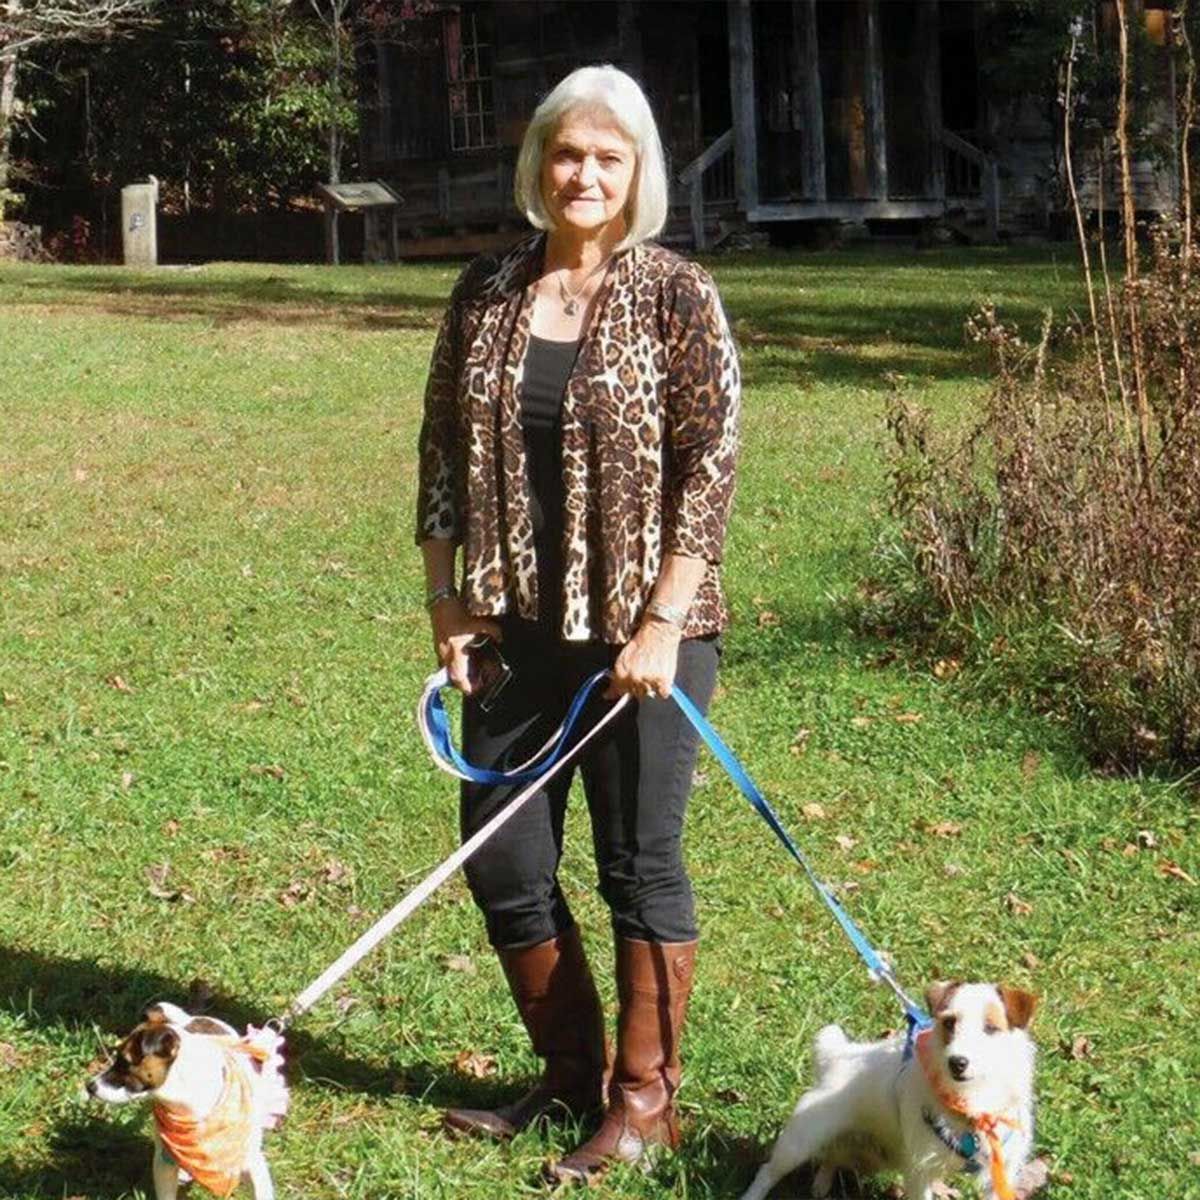 A woman in a leopard print jacket is walking two dogs on leashes